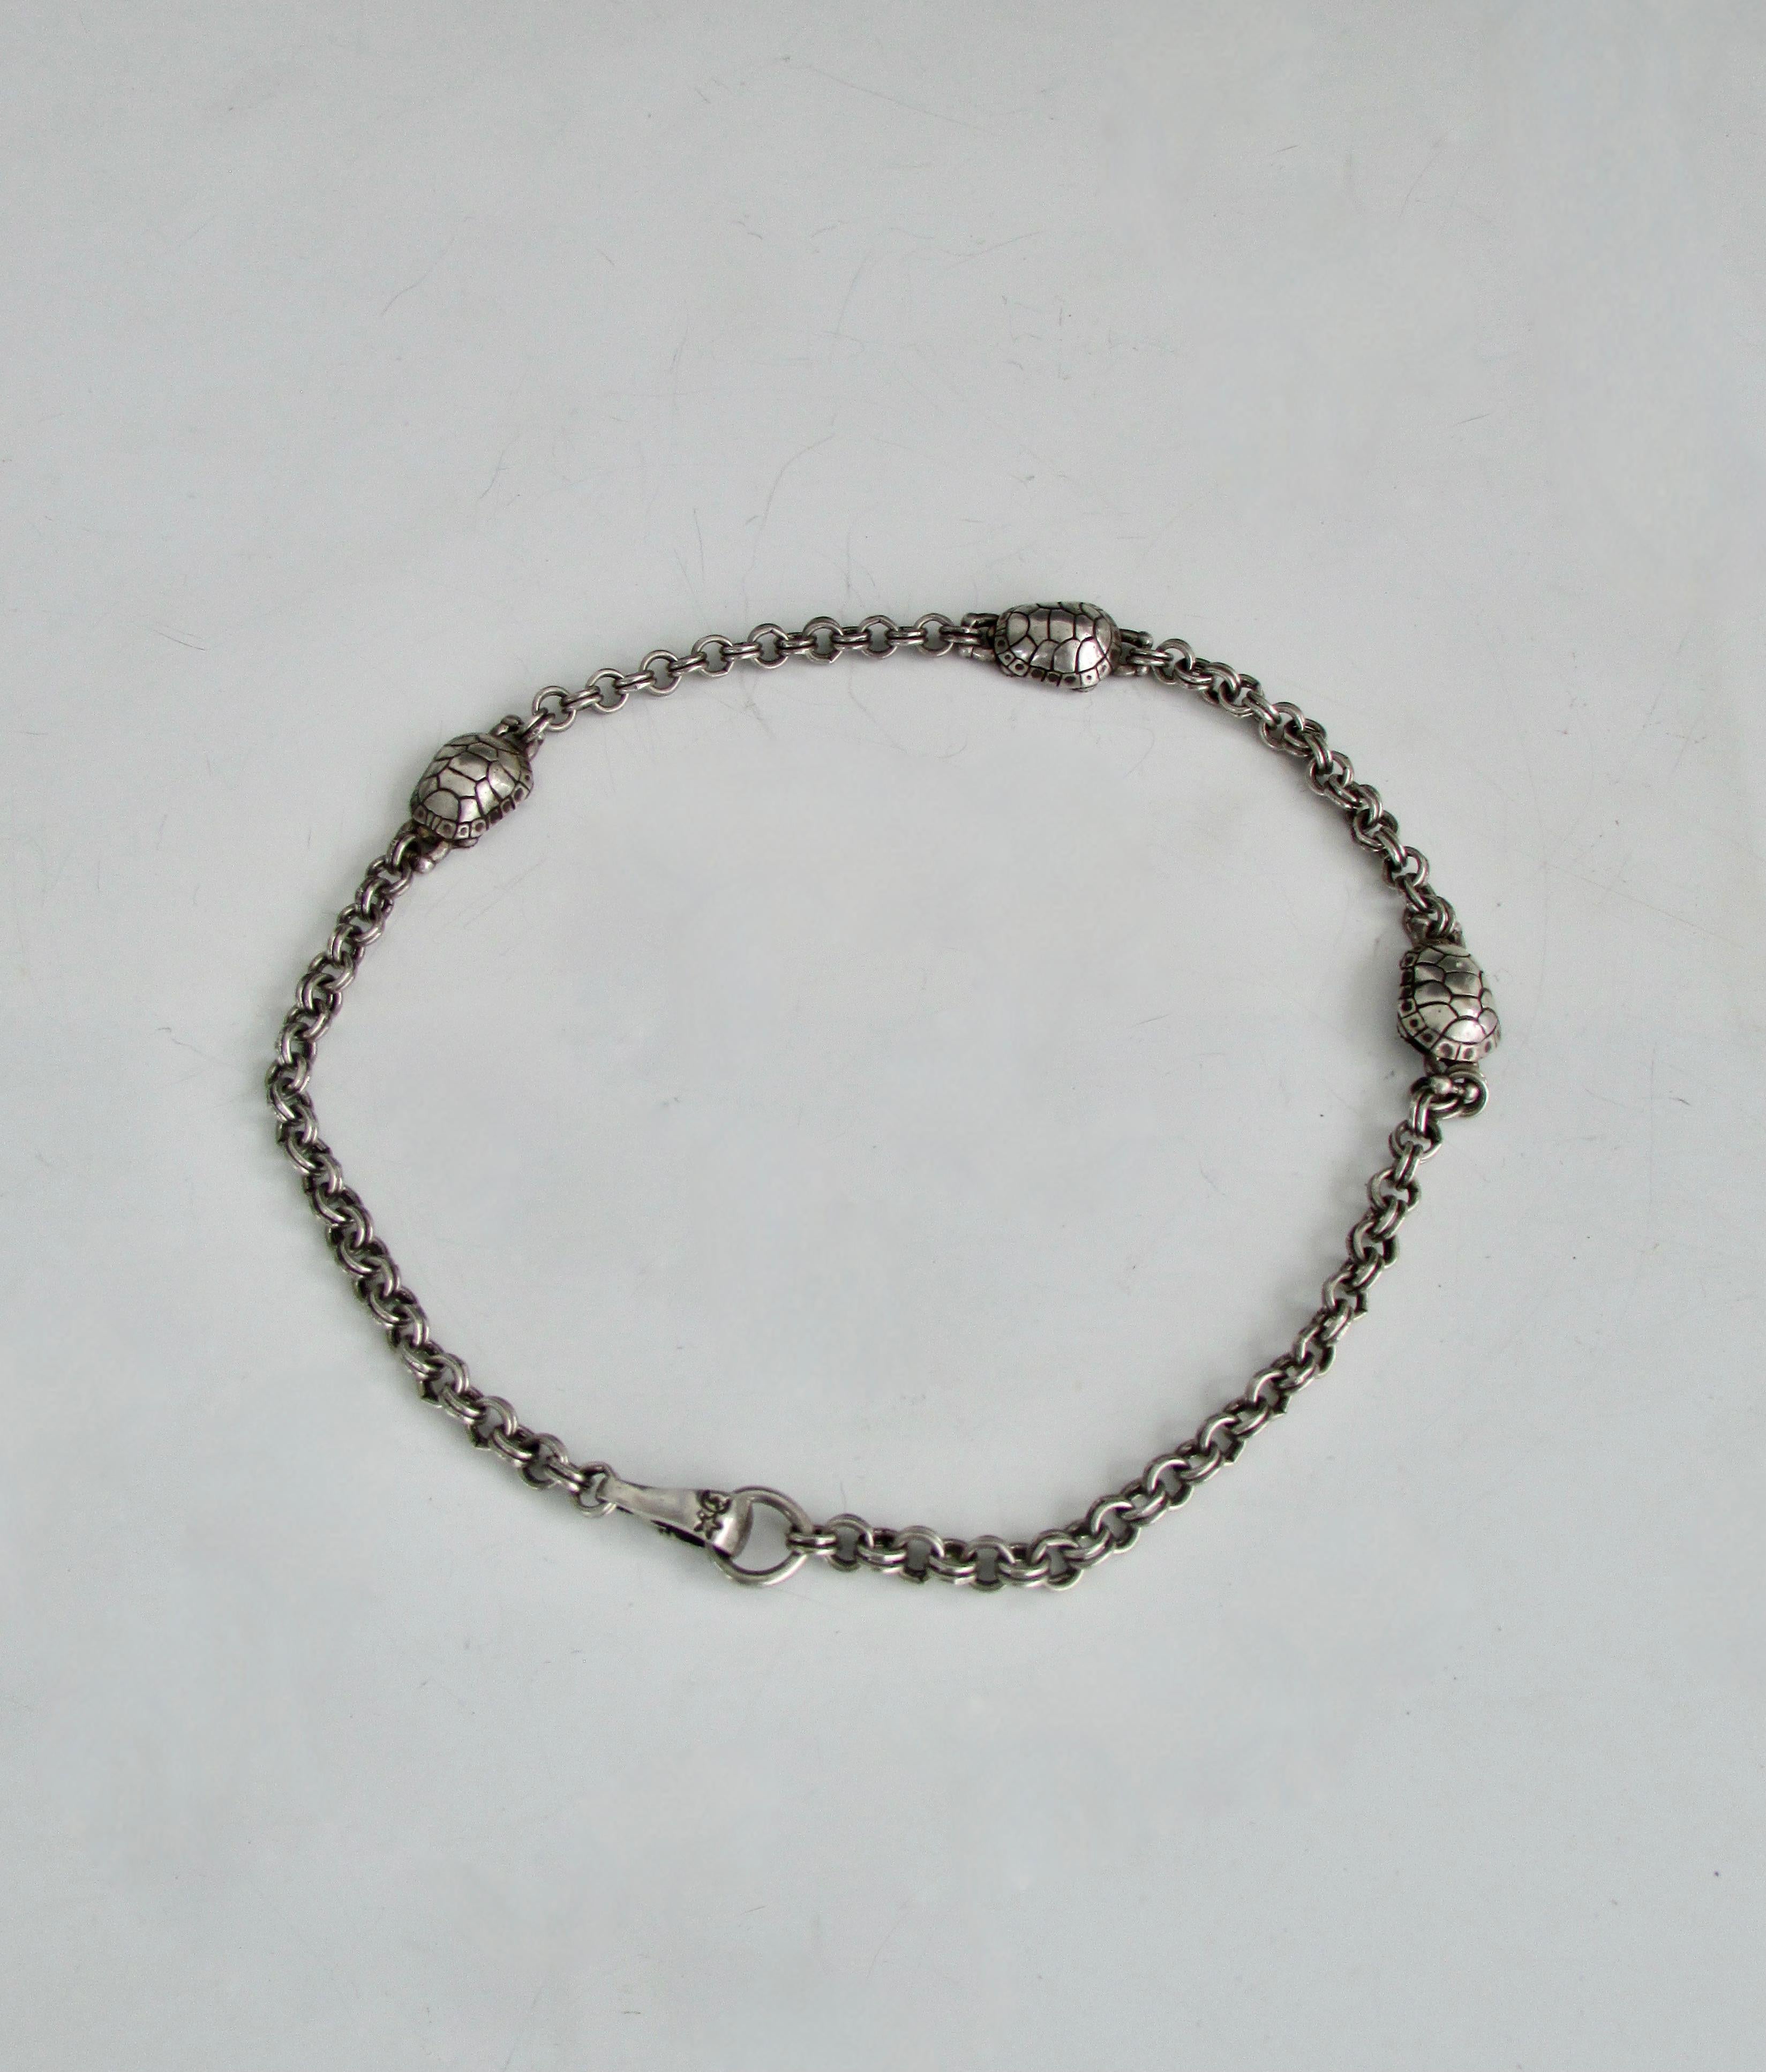 Kieselstein Cord Sterling Silver Turtle Necklace In Good Condition For Sale In Ferndale, MI